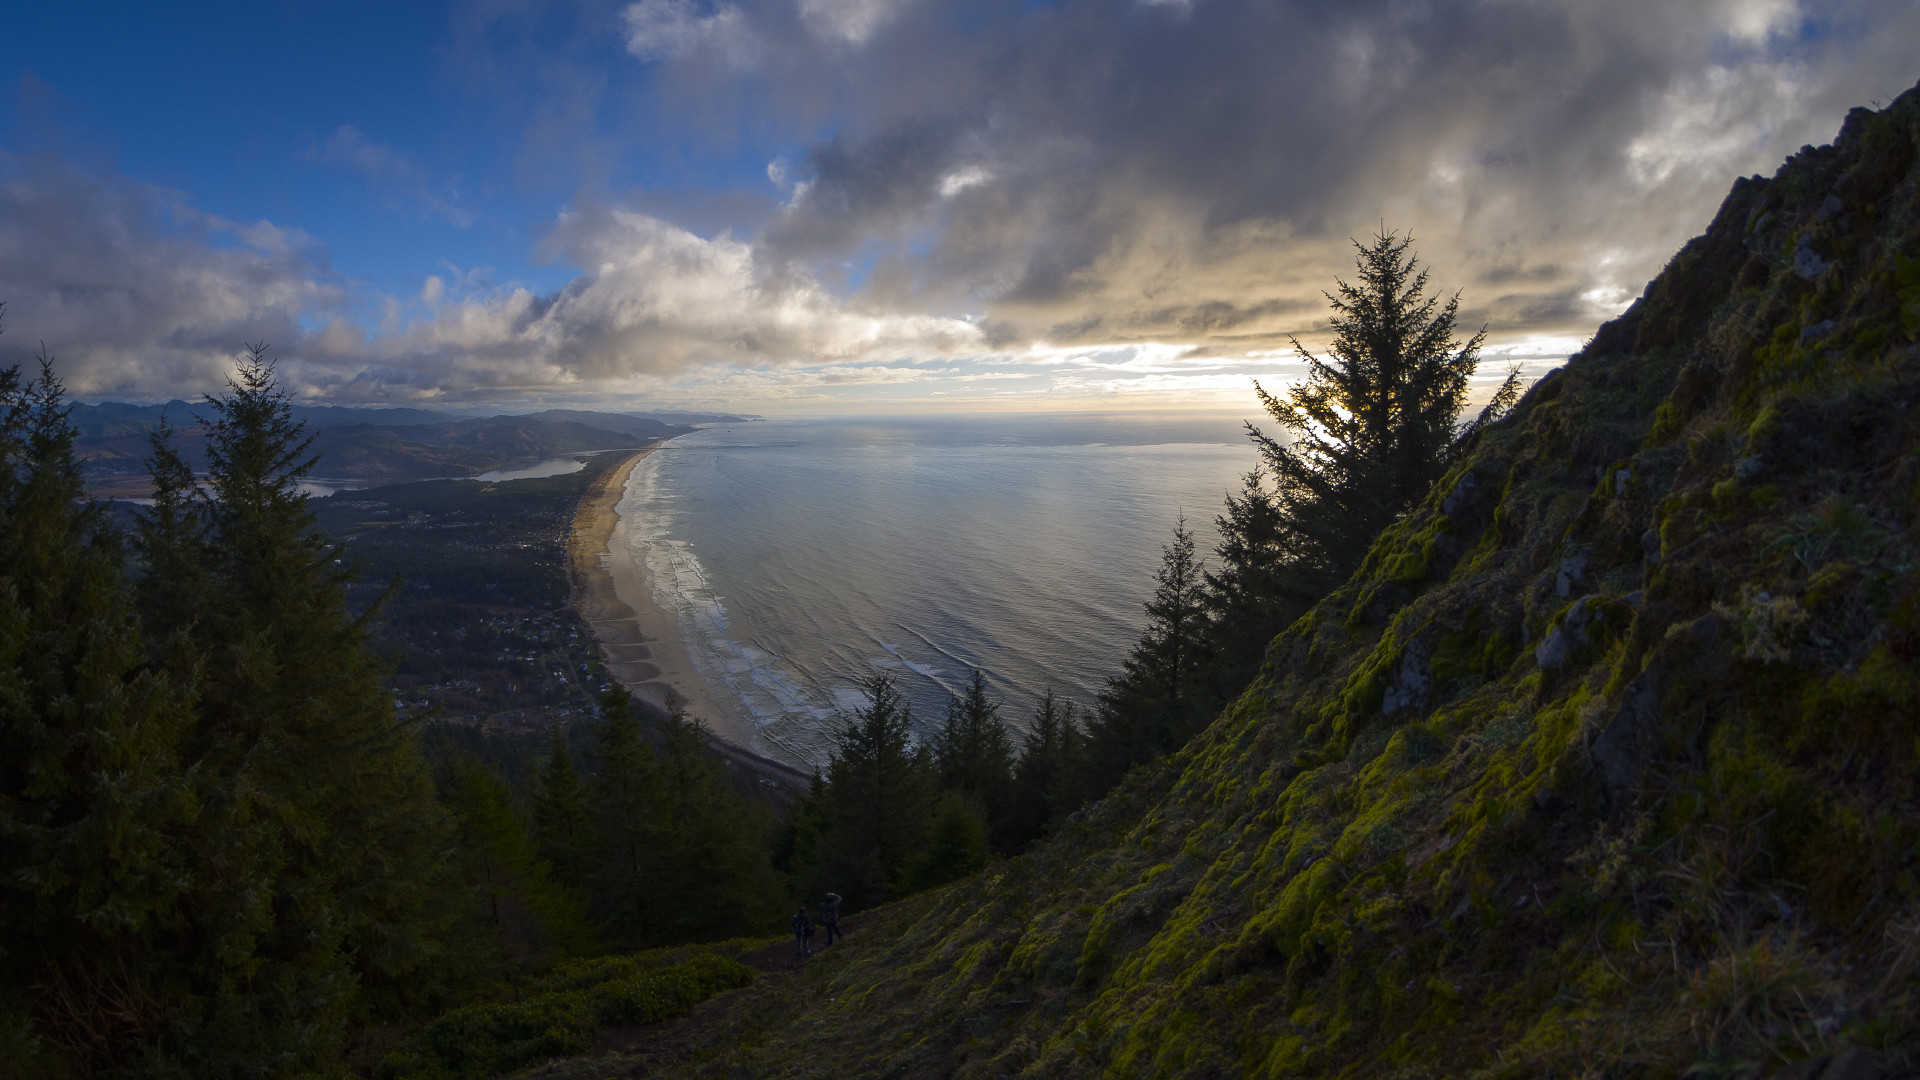 Here Are 5 Hikes on the Oregon Coast With Unforgettable Views